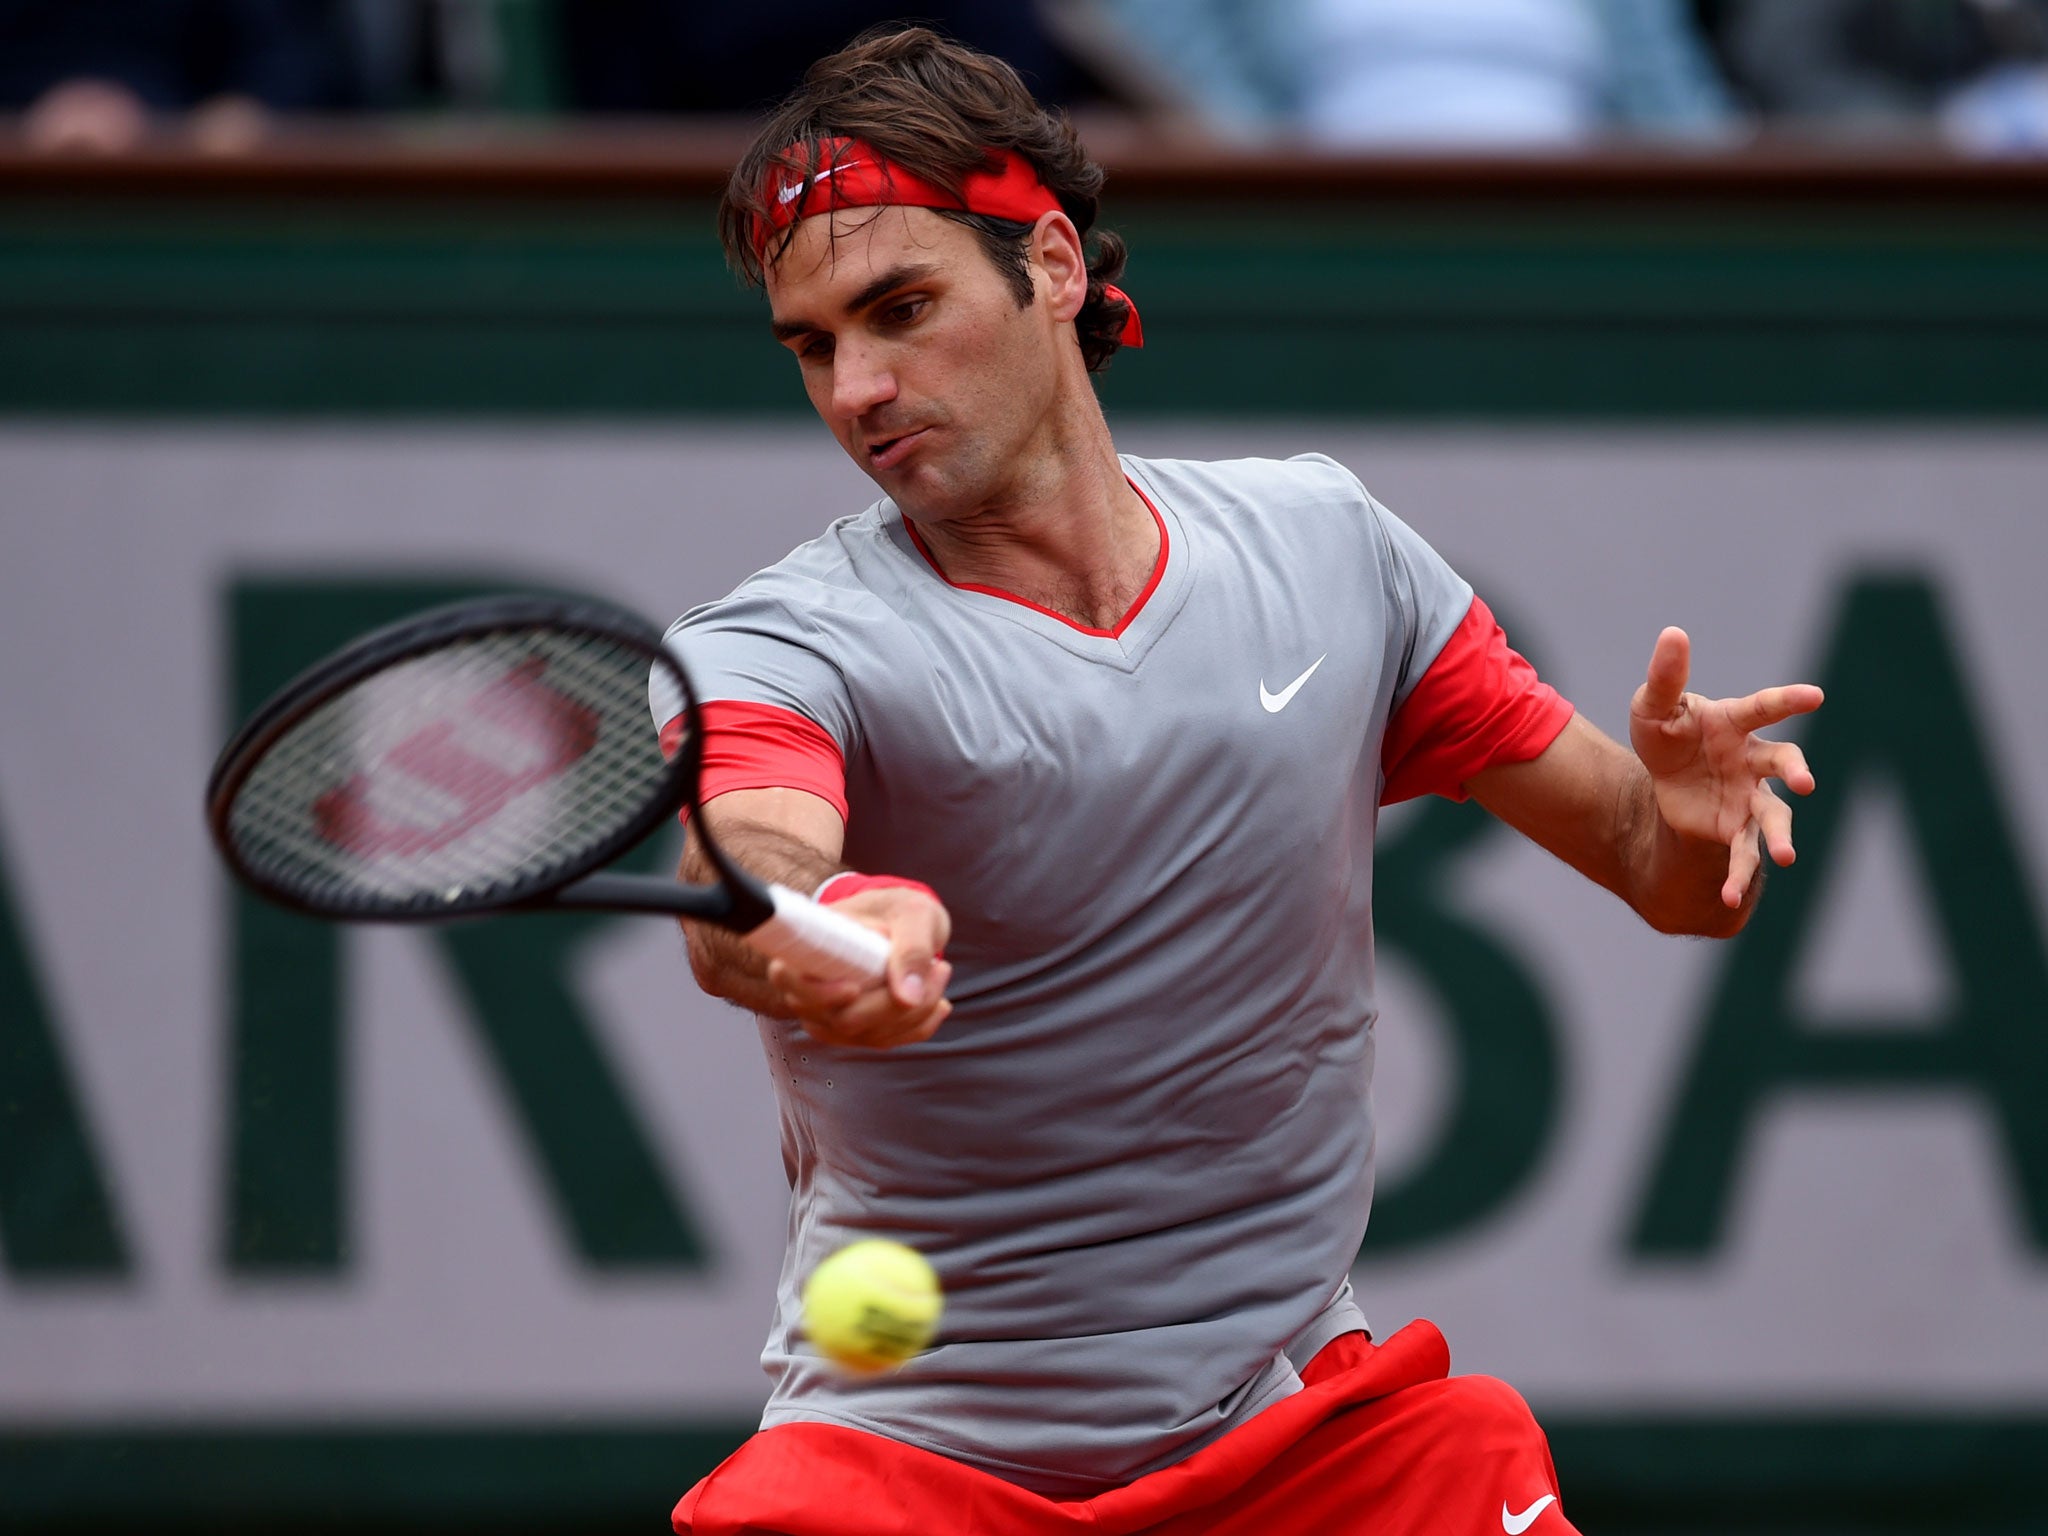 Roger Federer on his way to a straight-sets victory over Lukas Lacko